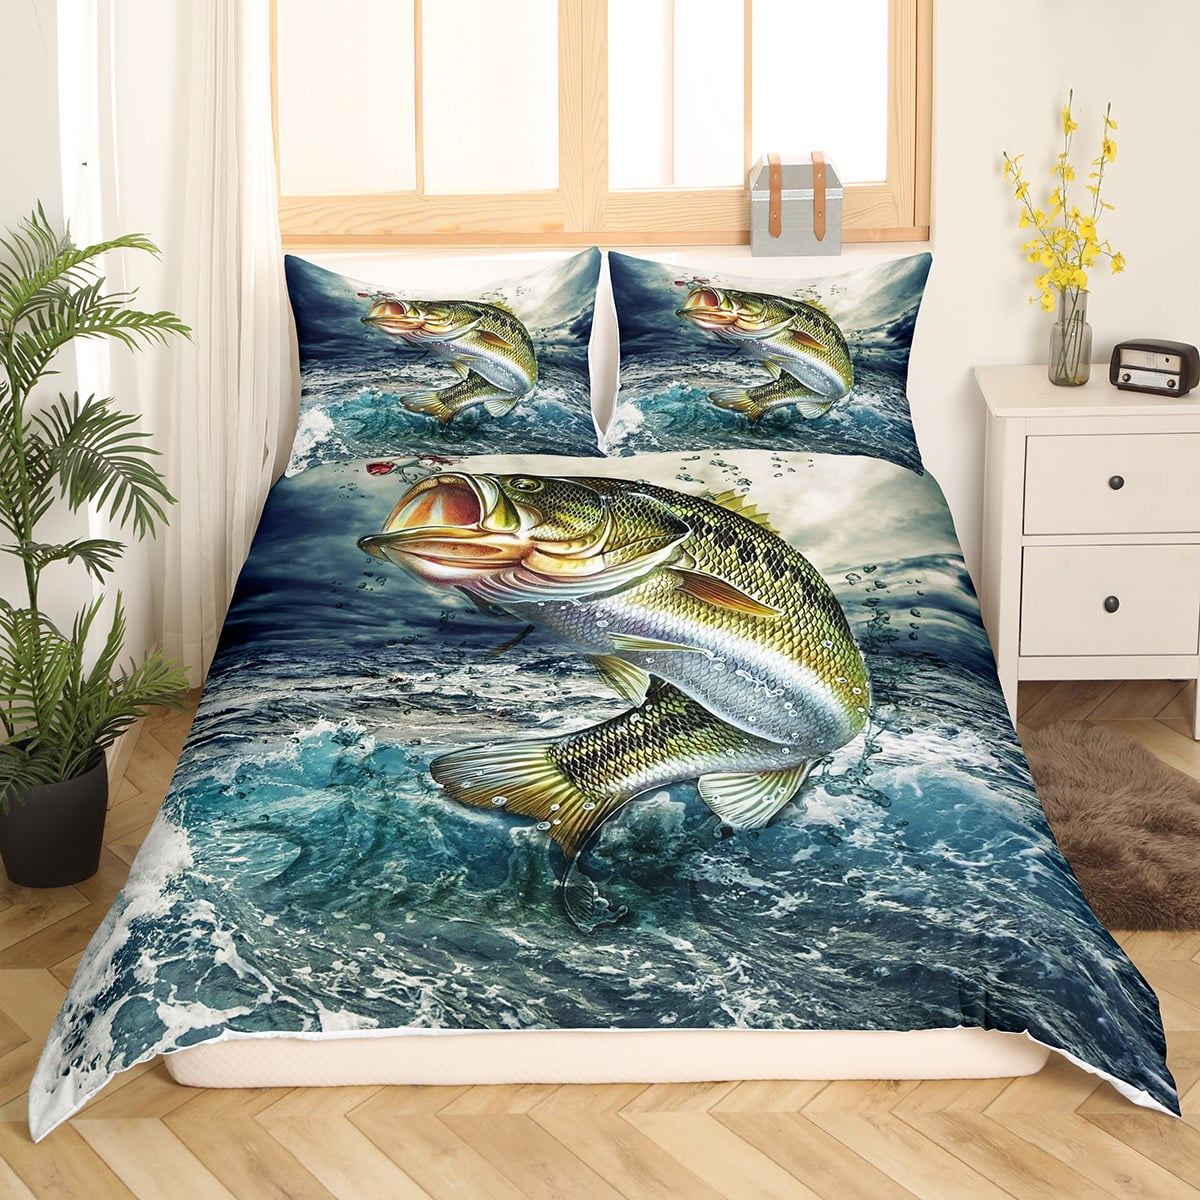 YST Bass Big Fish Comforter Cover Queen Size,Pike Big Fish Bedding